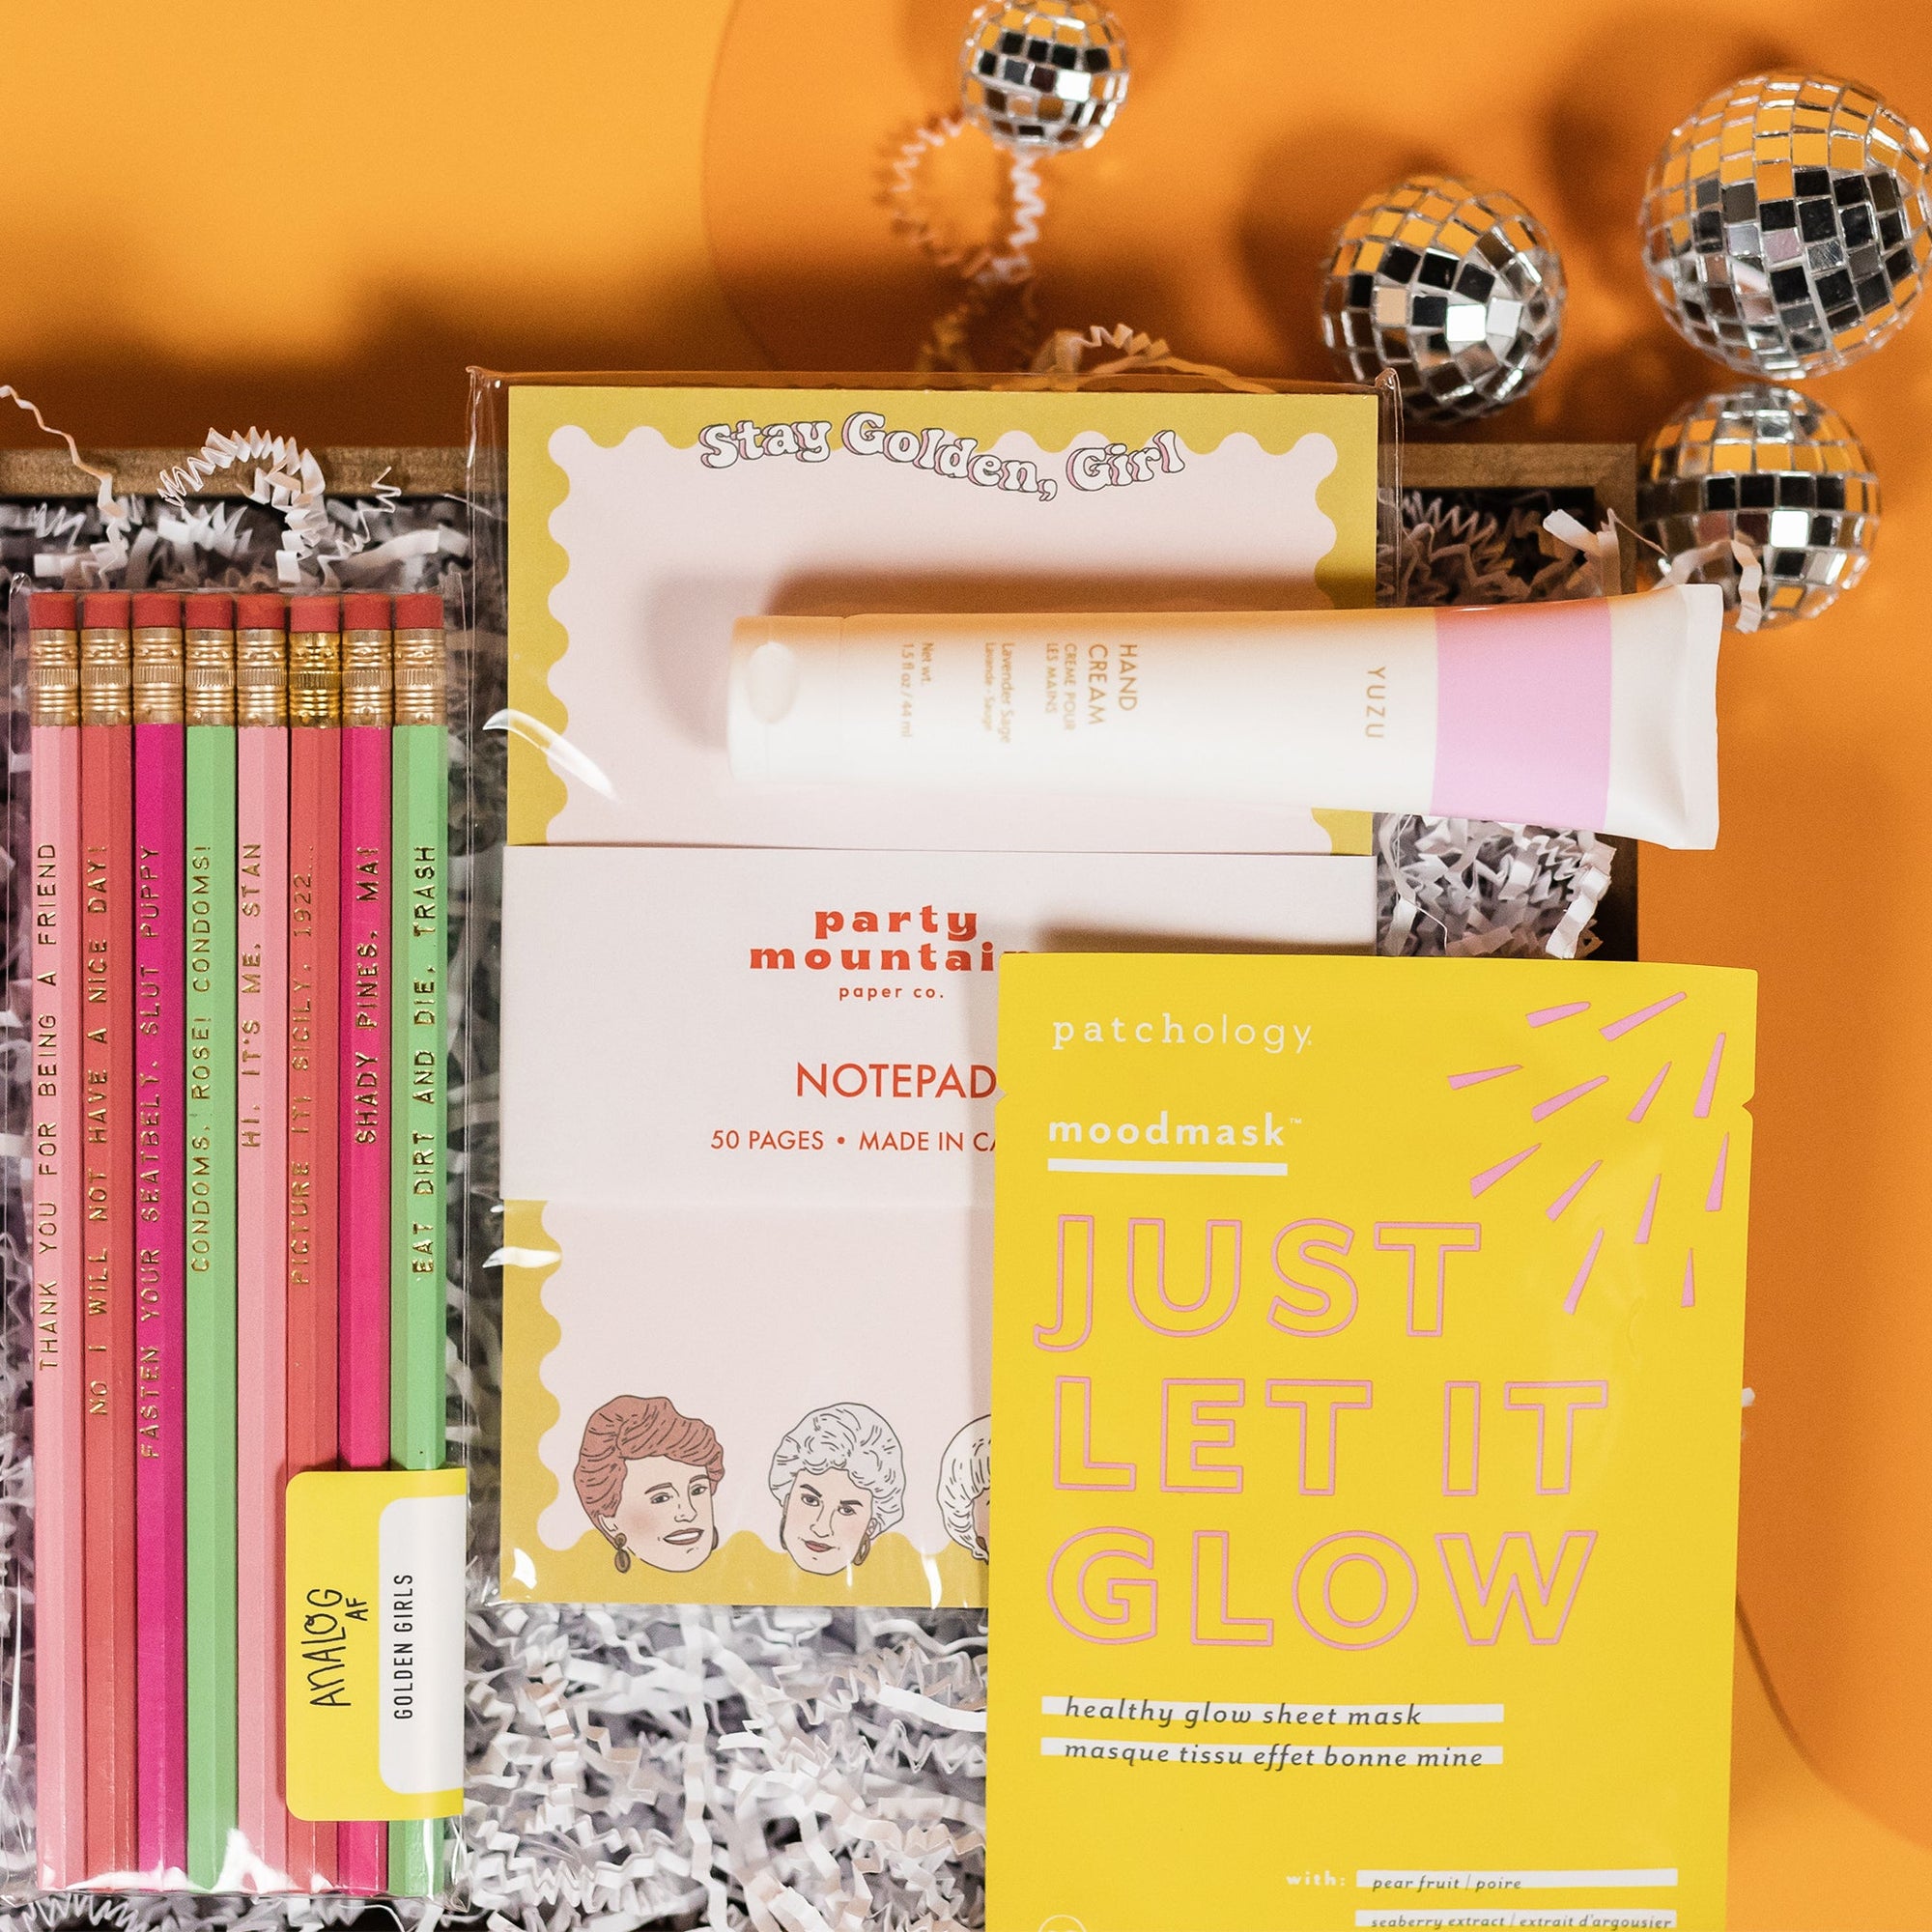 On a sunny mustard and orange wavy background with small silver disco balls sits a wood box full of Golden Girls inspired gifts. It is close-up a clear package with a set of 8 pencils in baby pink, coral, hot pink, and mint. They have various sayings on them from the hit show. Next to it is a "Stay Golden, Girl" white notepad, white tube of 'Yuzu' Hand Cream, and a yellow package of "JUST LET IT GLOW" healthy glow sheet mask with pear fruit.